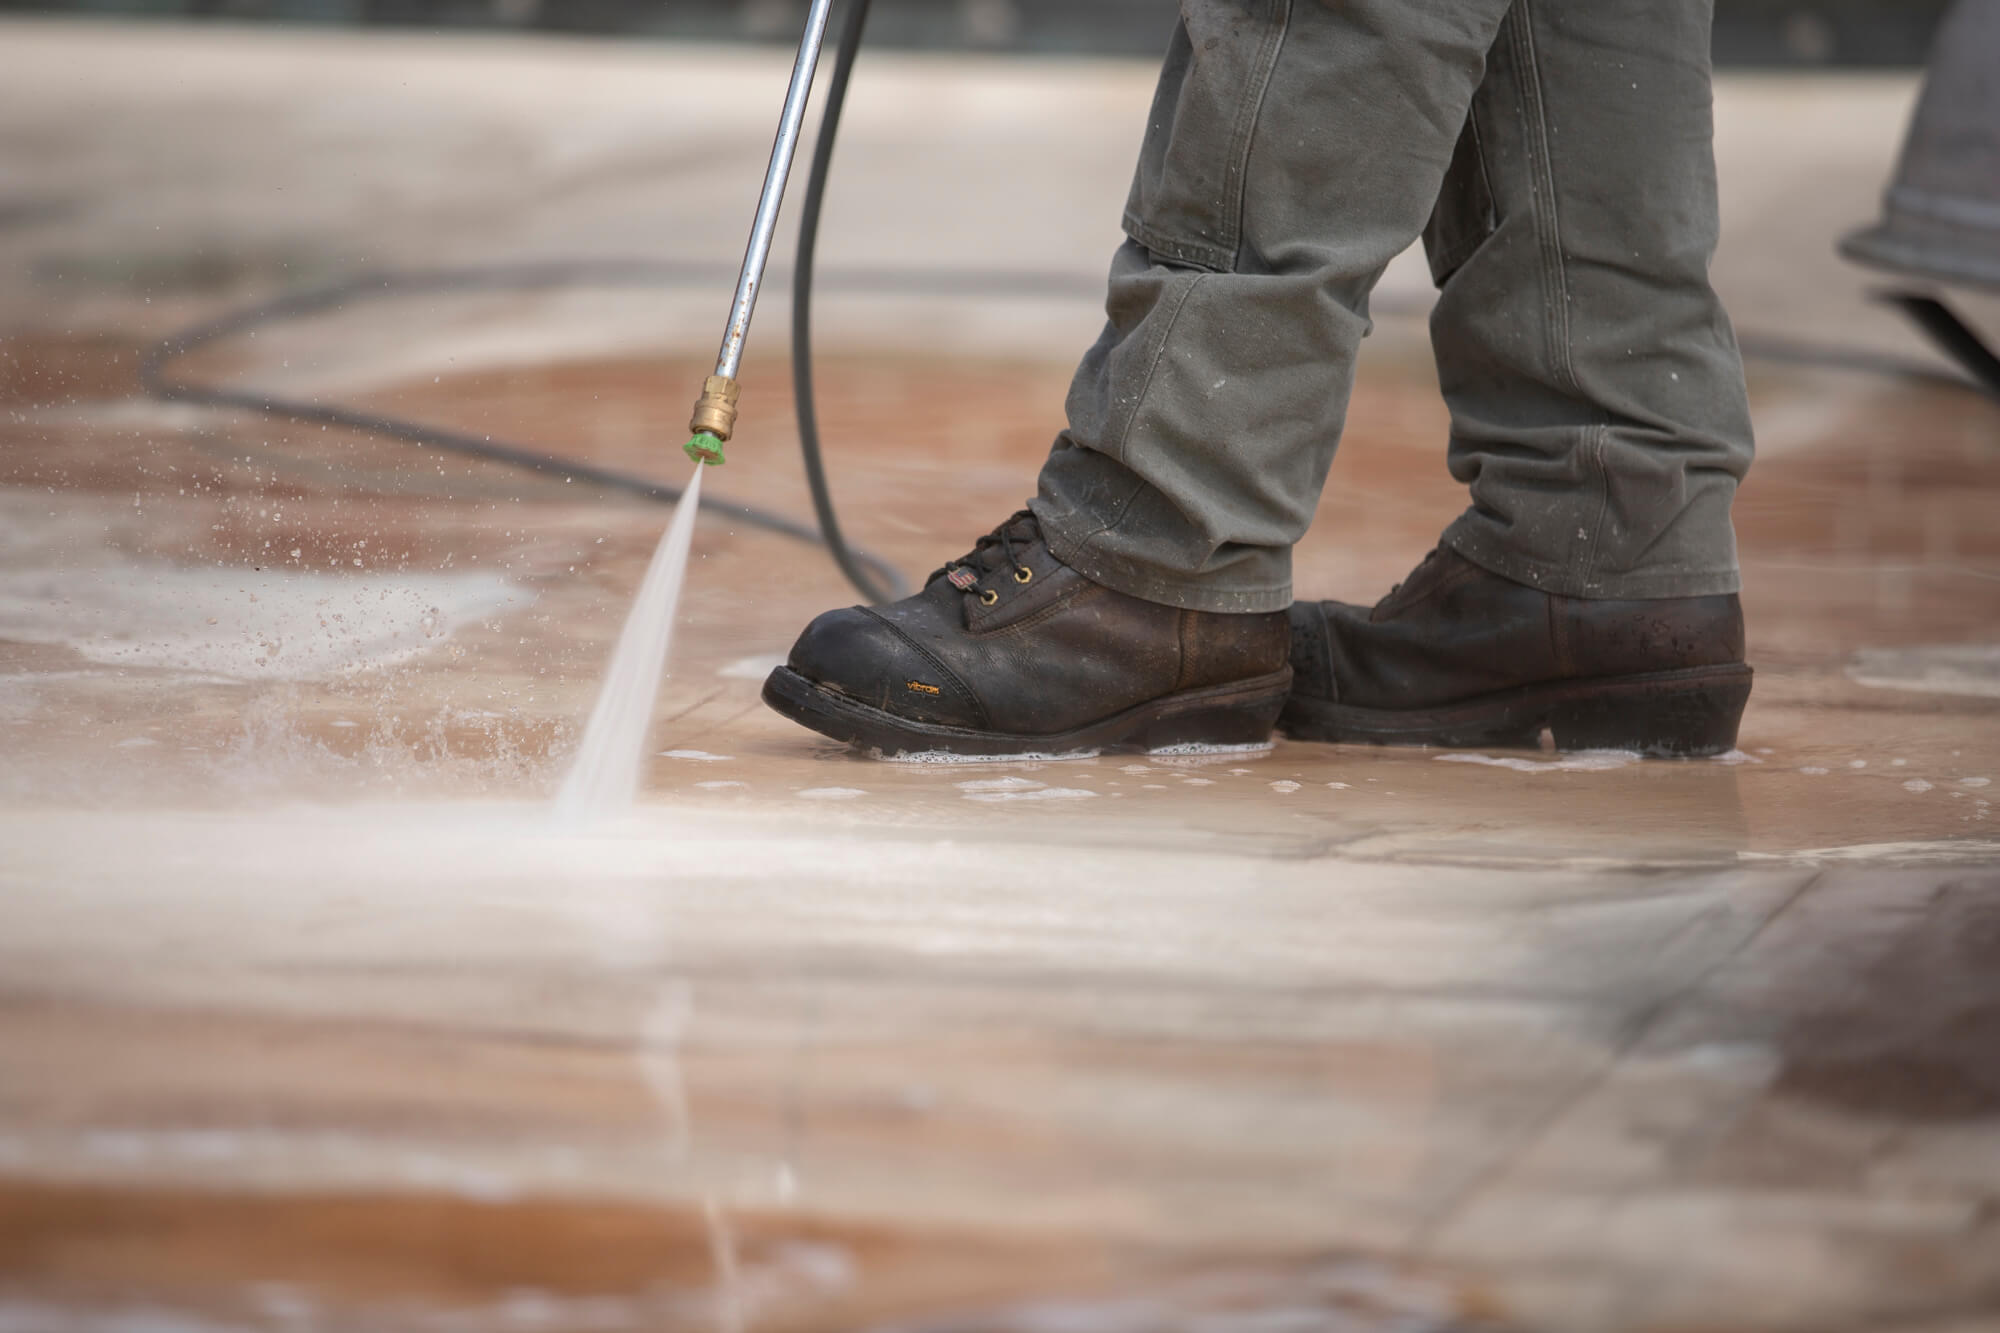 A roofing technician power washes a roof, only his legs and power washer are visible